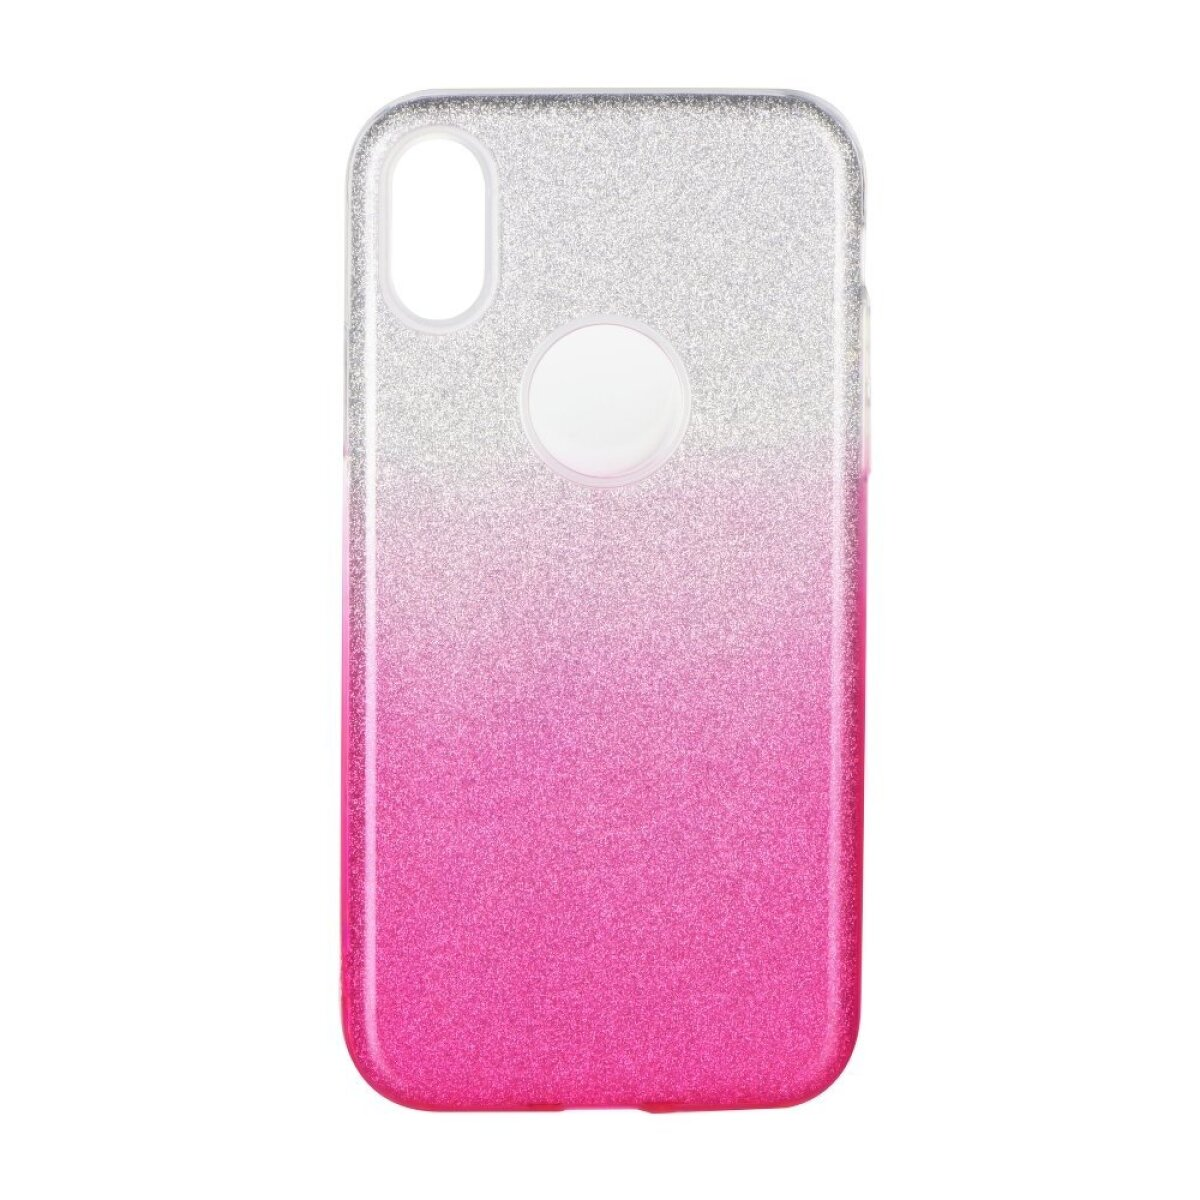 Lite, LITE Full SHINING Pink Cover, FORCELL Huawei, transparent/rosa, P40 P40 Huawei